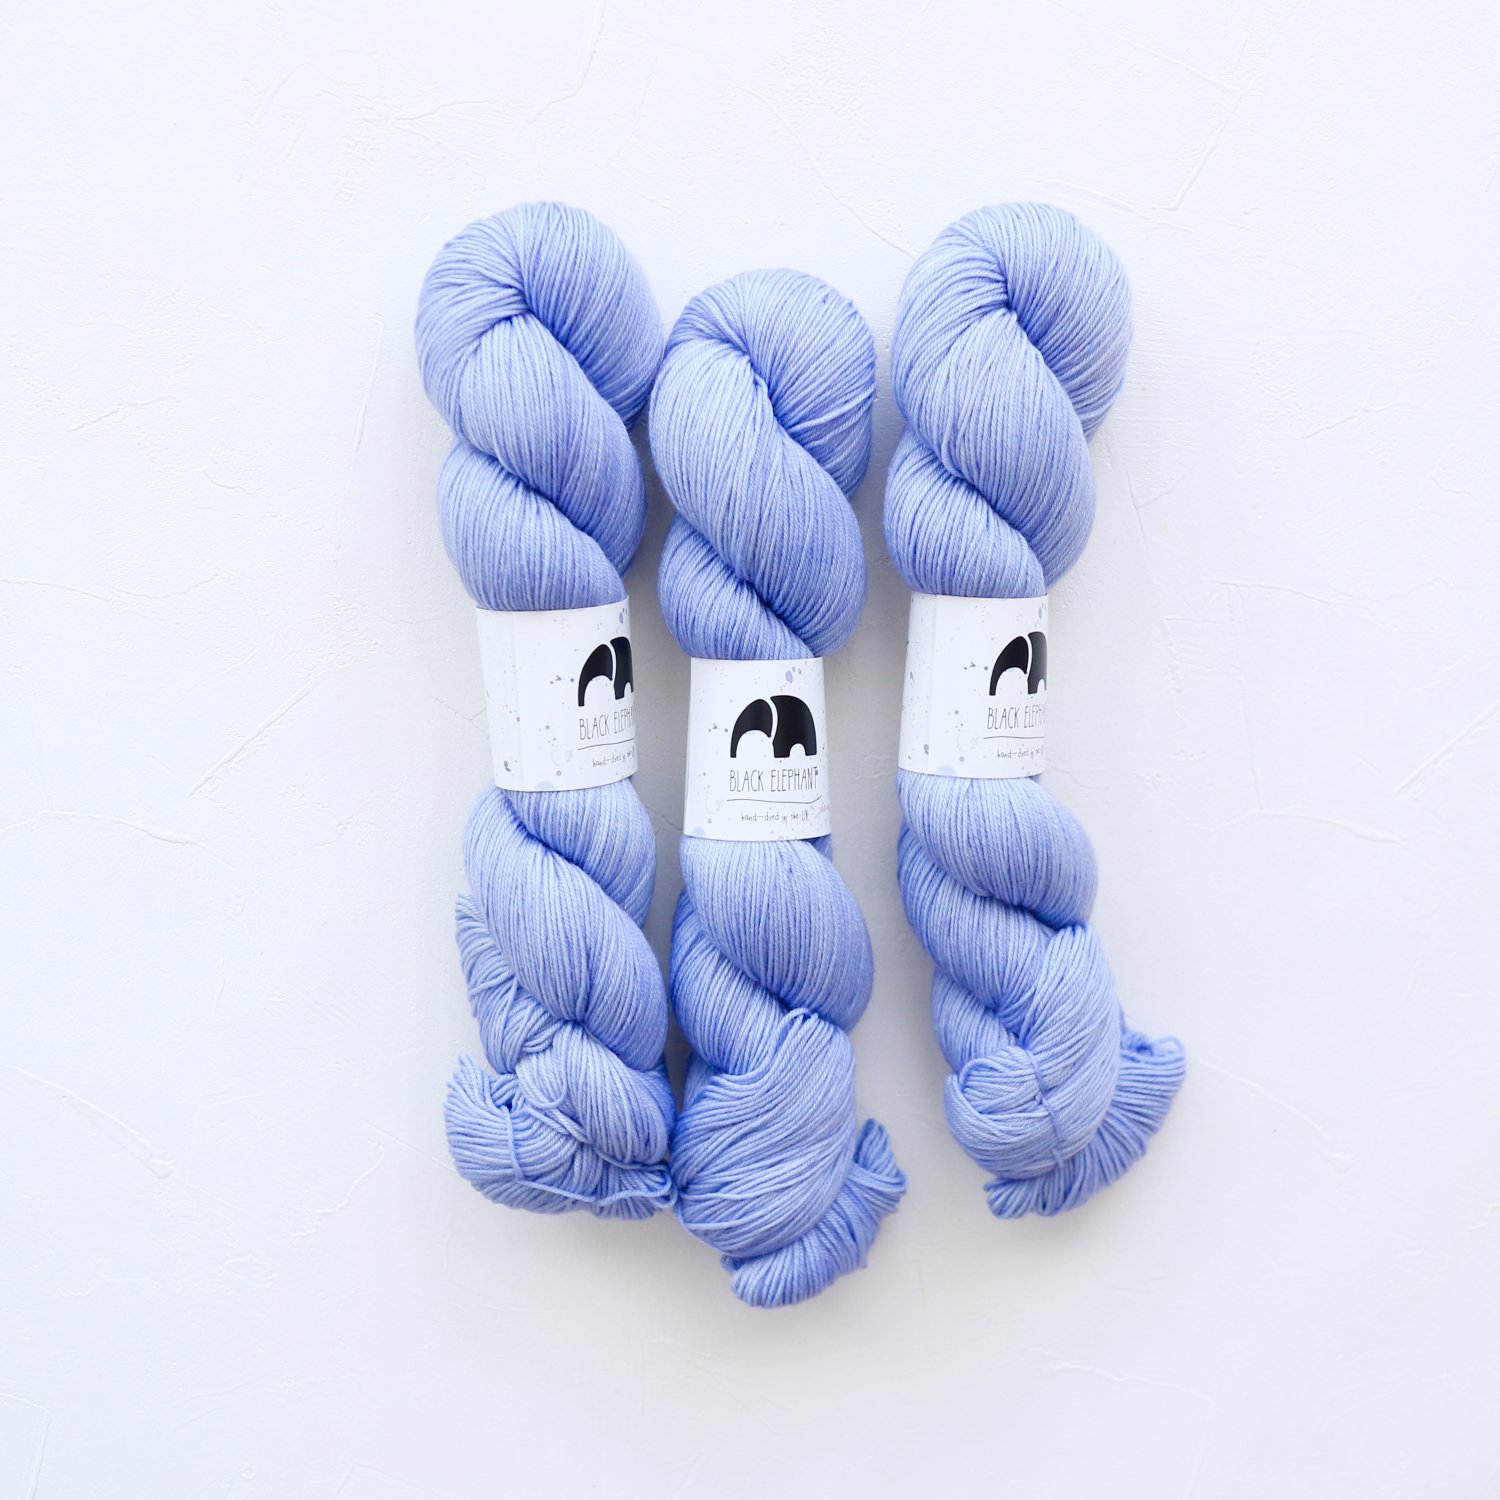 Black elephant<br>BE Pure Merino Sock<br>Forget me not